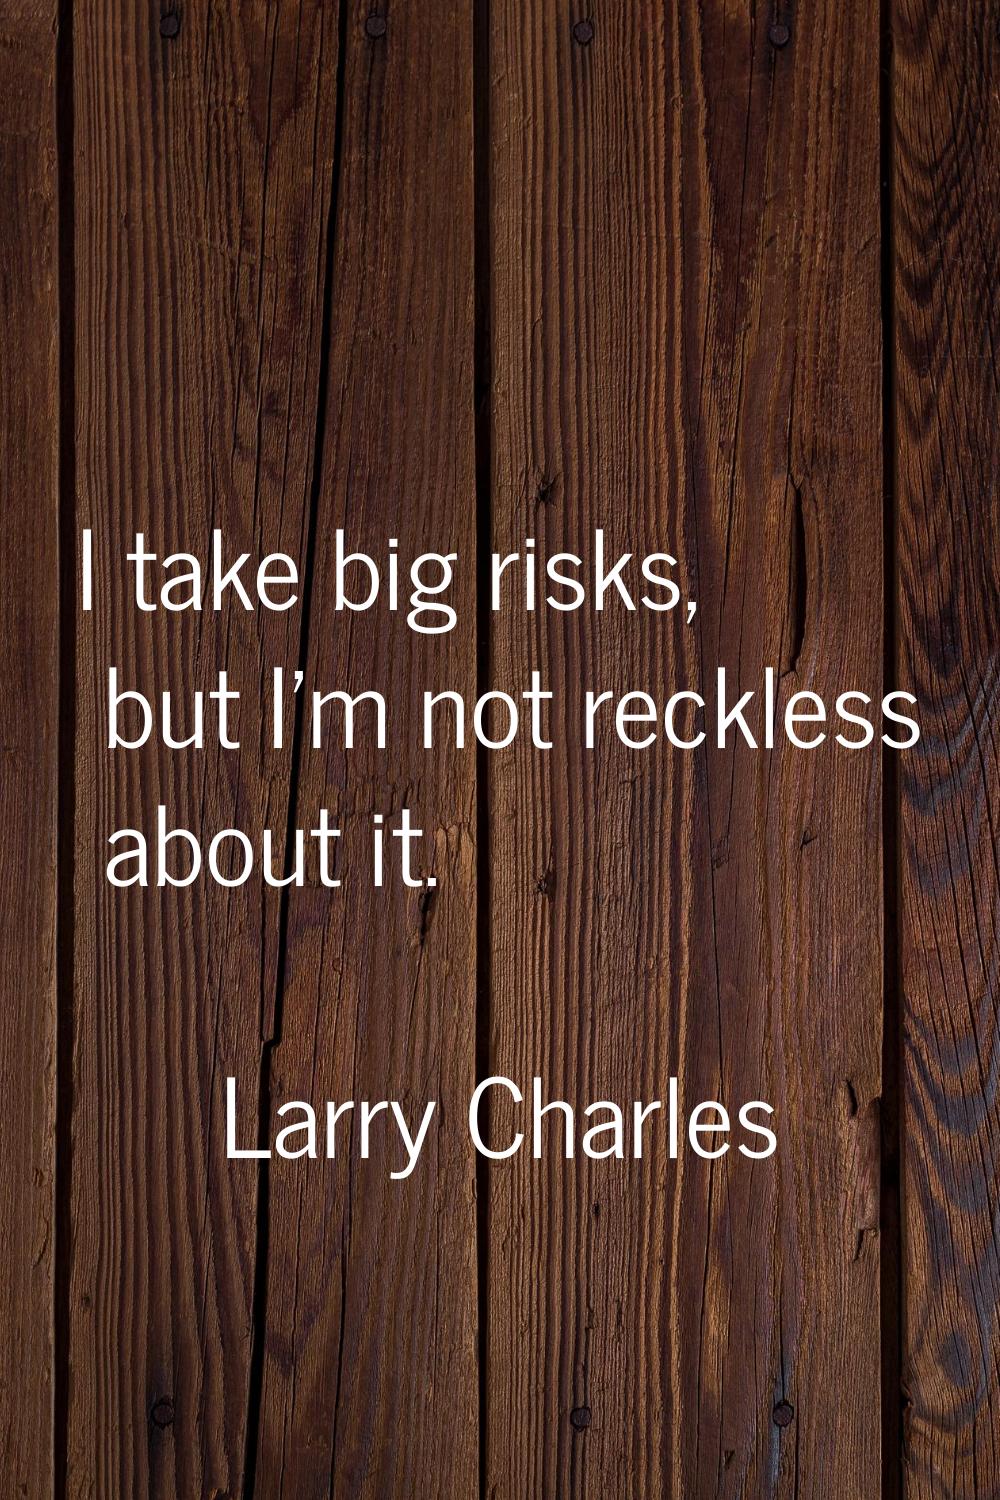 I take big risks, but I'm not reckless about it.